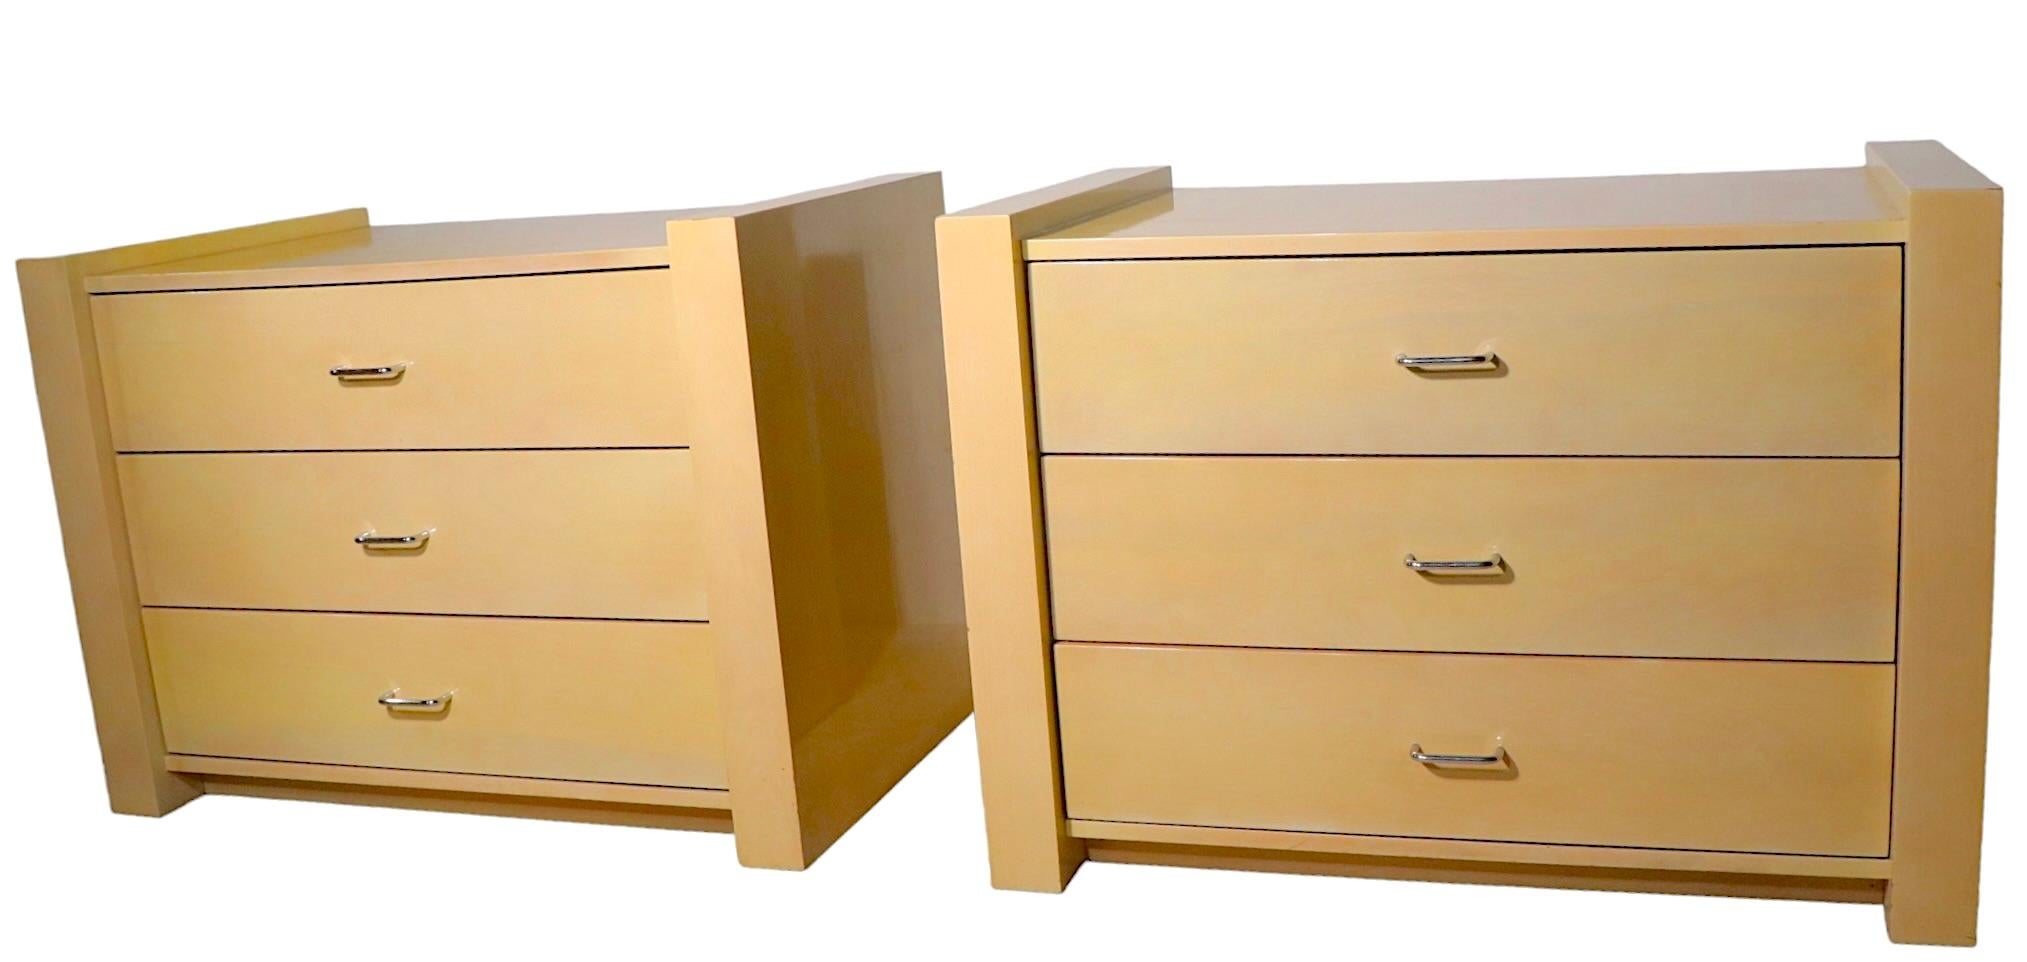 Pr. Post Modern Lacquered Three Drawer Commode Night Stands Chests In Good Condition For Sale In New York, NY